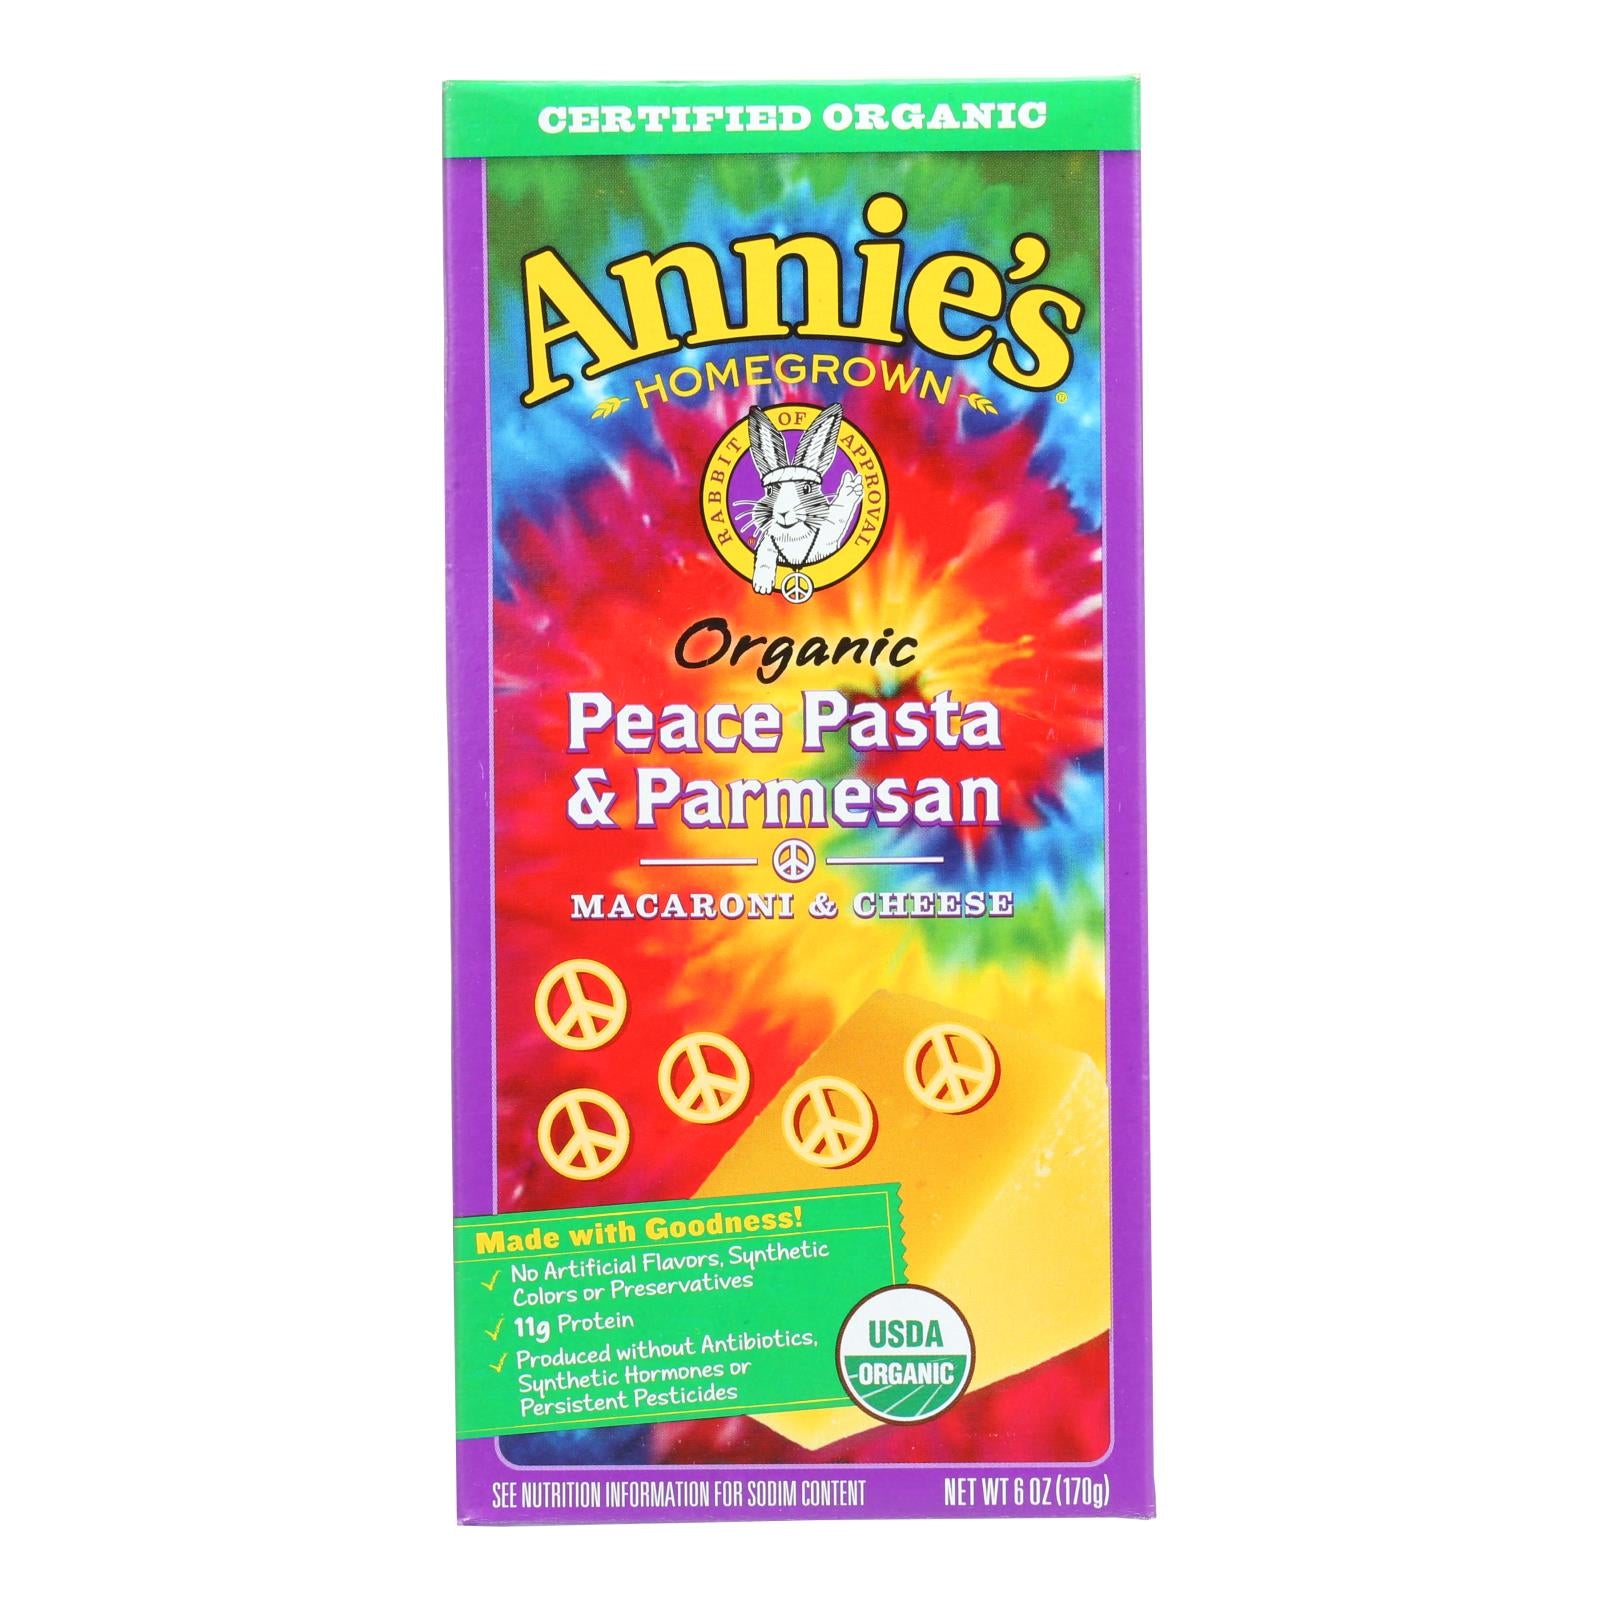 Annie'S Homegrown, Annies Homegrown Macaroni and Cheese - Organic - Peace Pasta and Parmesan - 6 oz - case of 12 (Pack of 12)